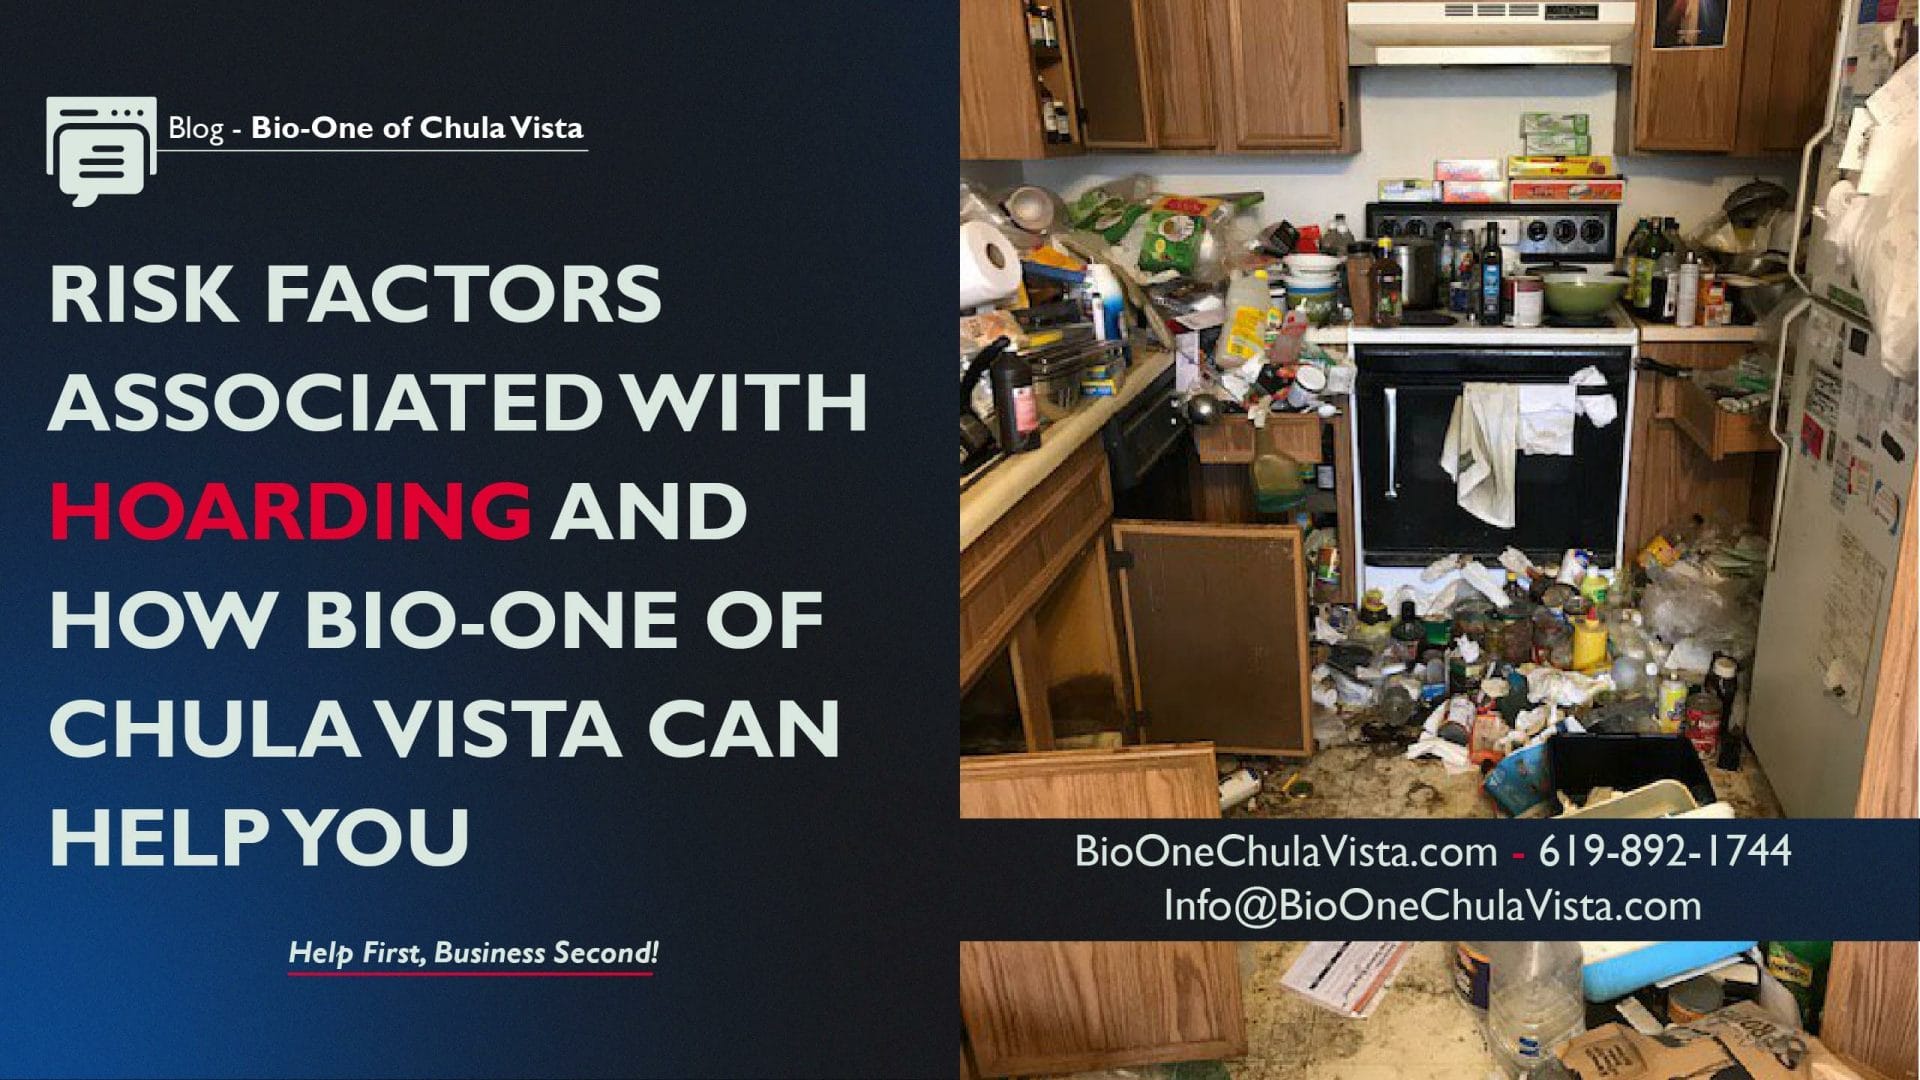 Blog - Risk factors associated with hoarding and how Bio-One of Chula Vista can help you